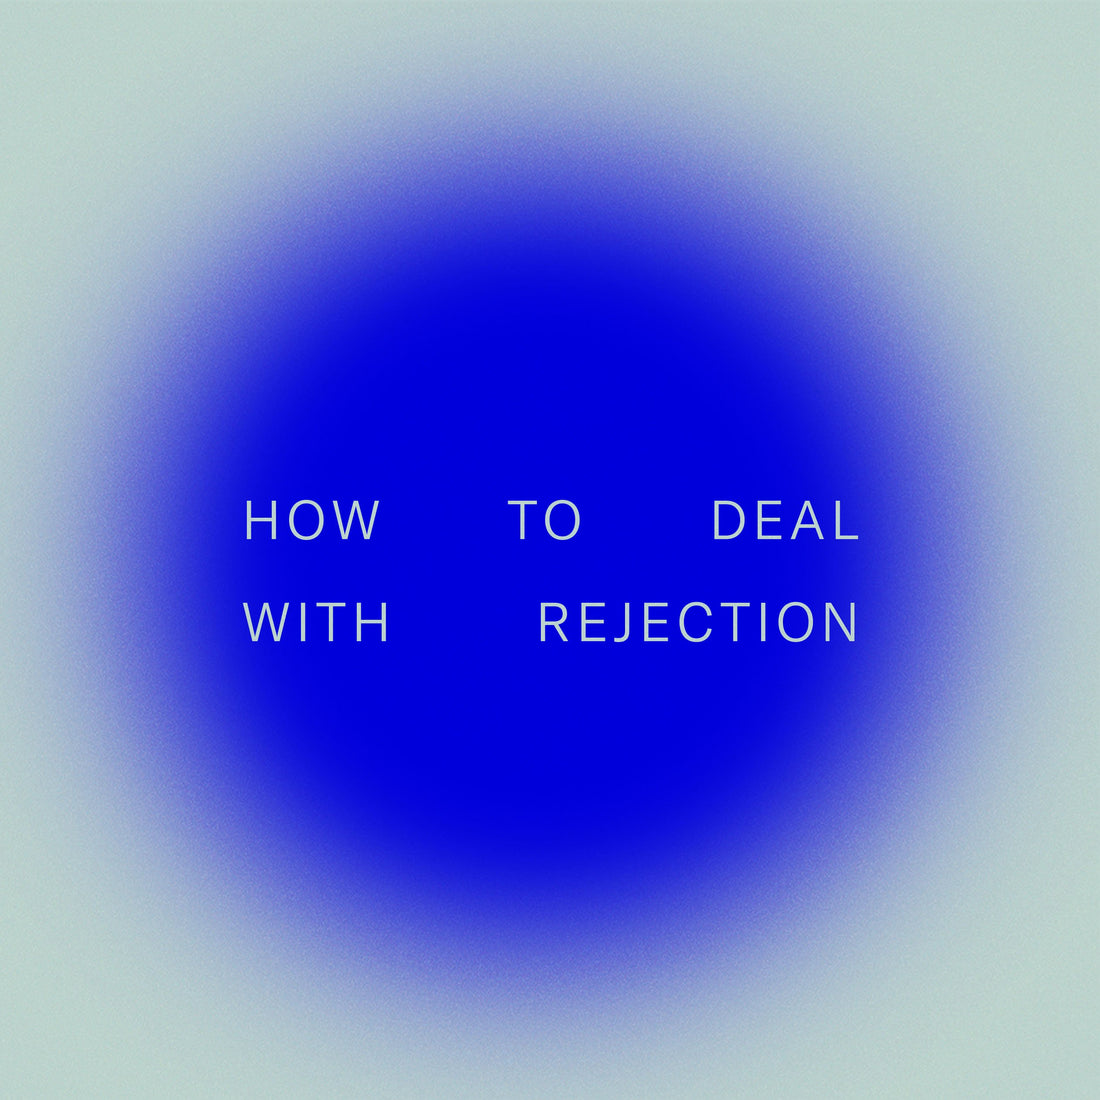 Image shows text reading "how to deal with rejection" centered in a blue orb against a jade background